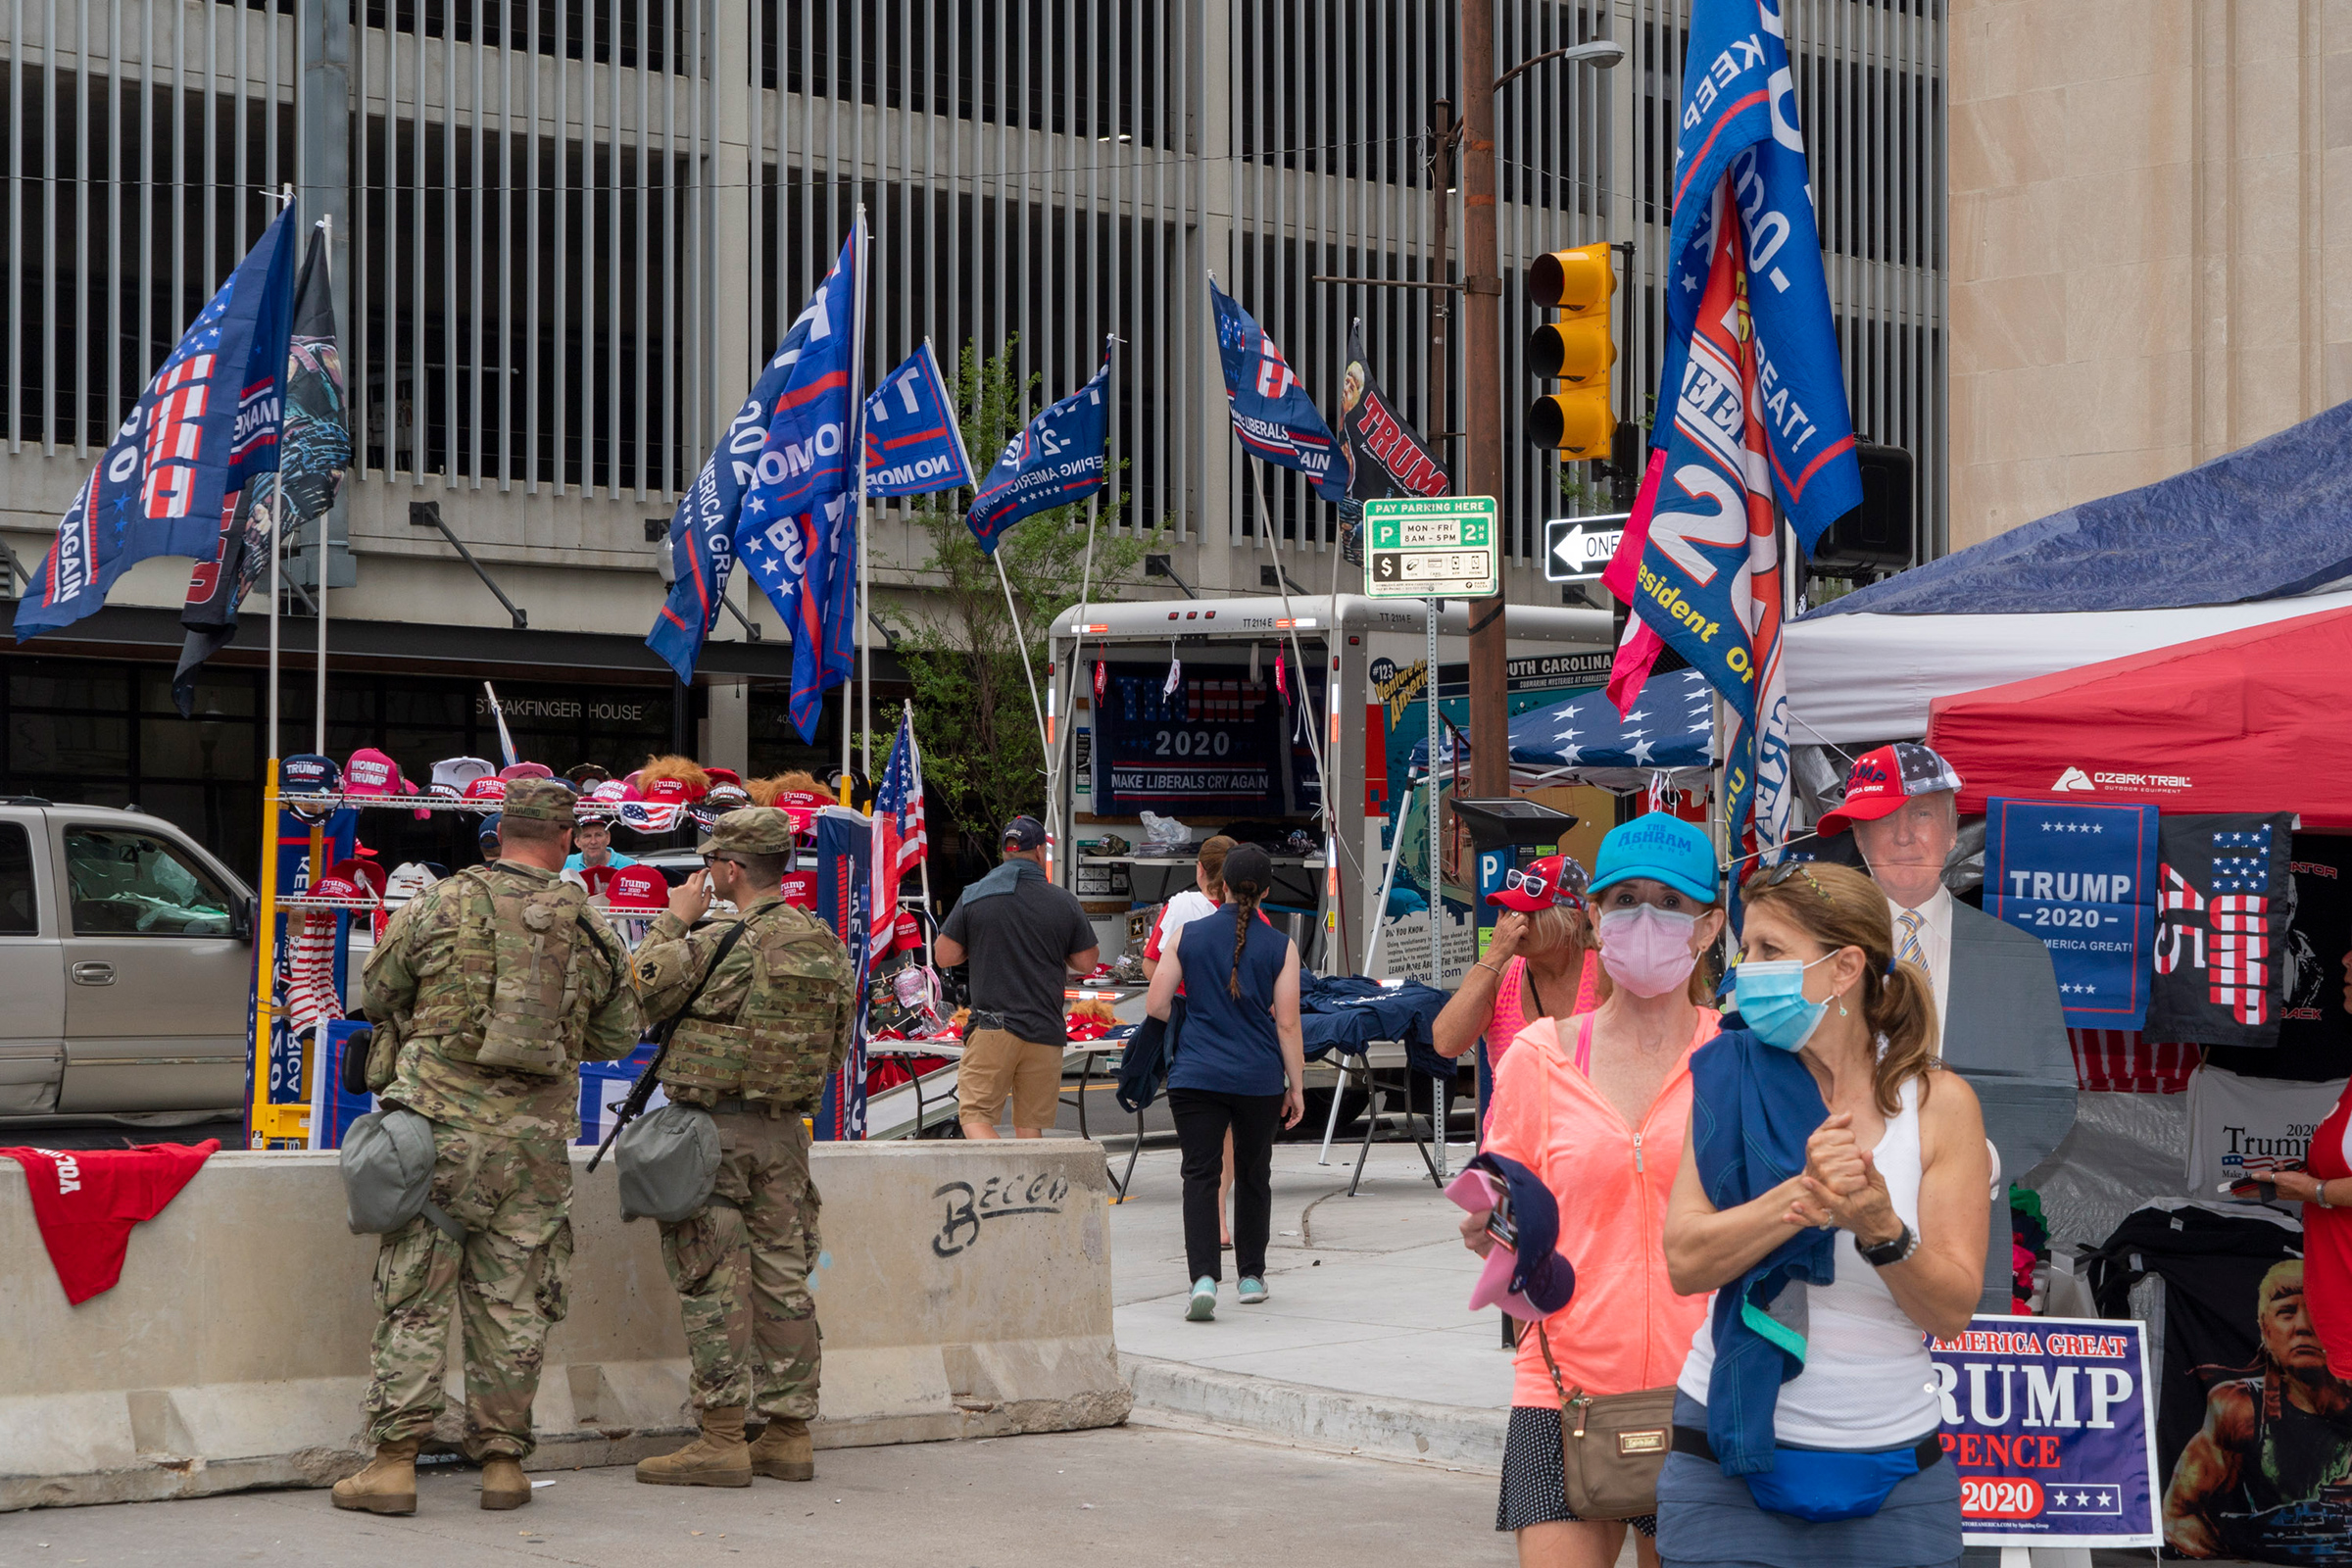 National Guard and vendors selling Trump memorabilia near an entrance to the Trump rally at the BOK Center in Tulsa, Okla., on June 20, 2020. (Peter van Agtmael—Magnum Photos for TIME)